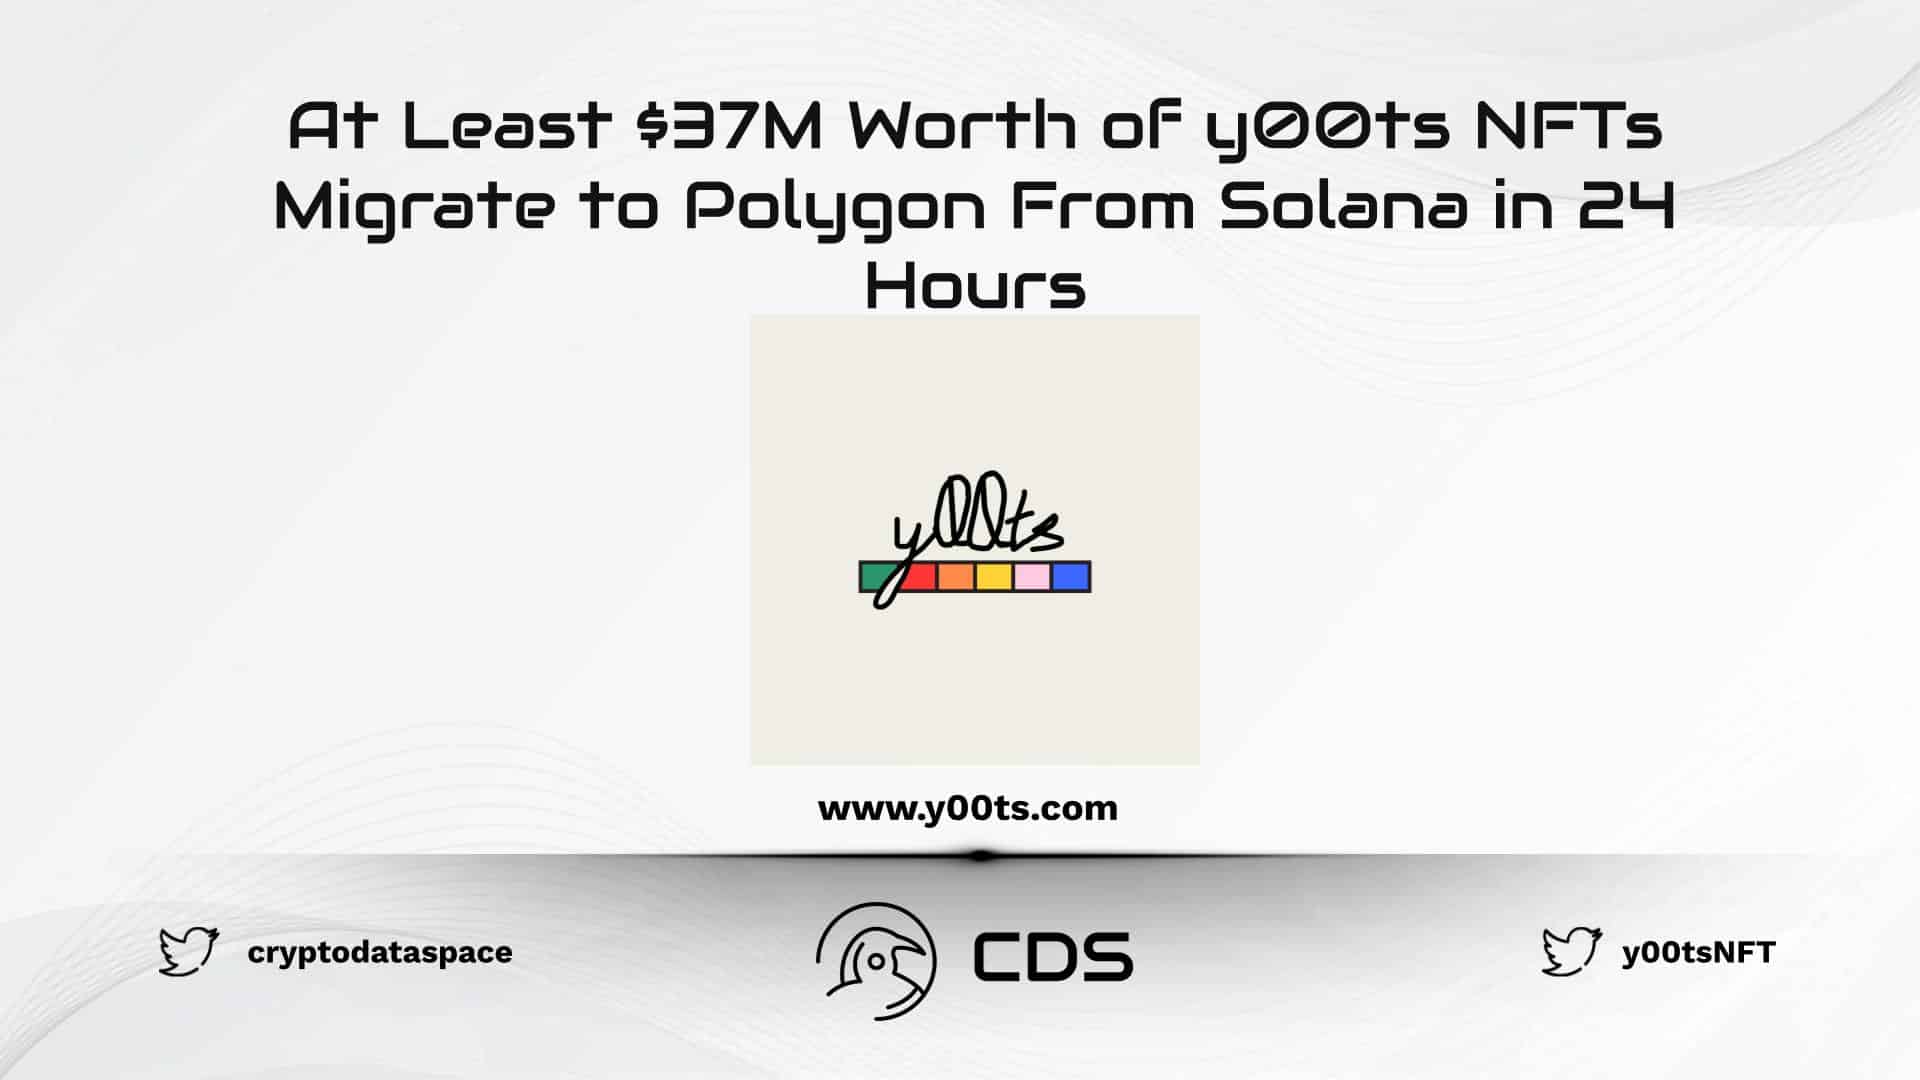 At Least $37M Worth of y00ts NFTs Migrate to Polygon From Solana in 24 Hours